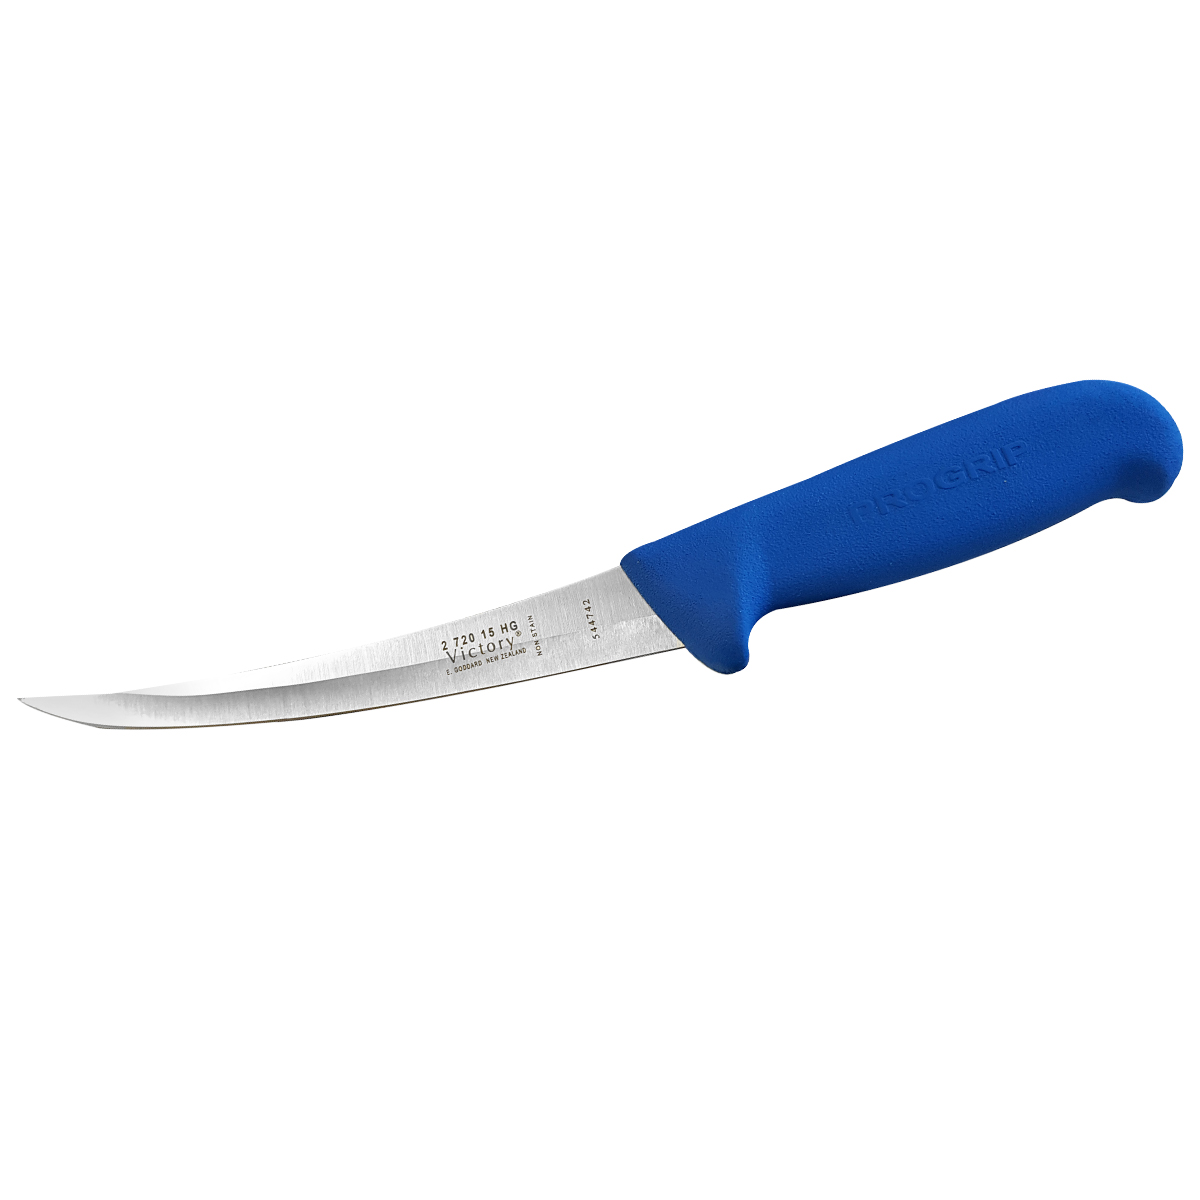 Victory Boning Knife, 15cm (6) - Curved, Hollow Ground, Progrip - Blue